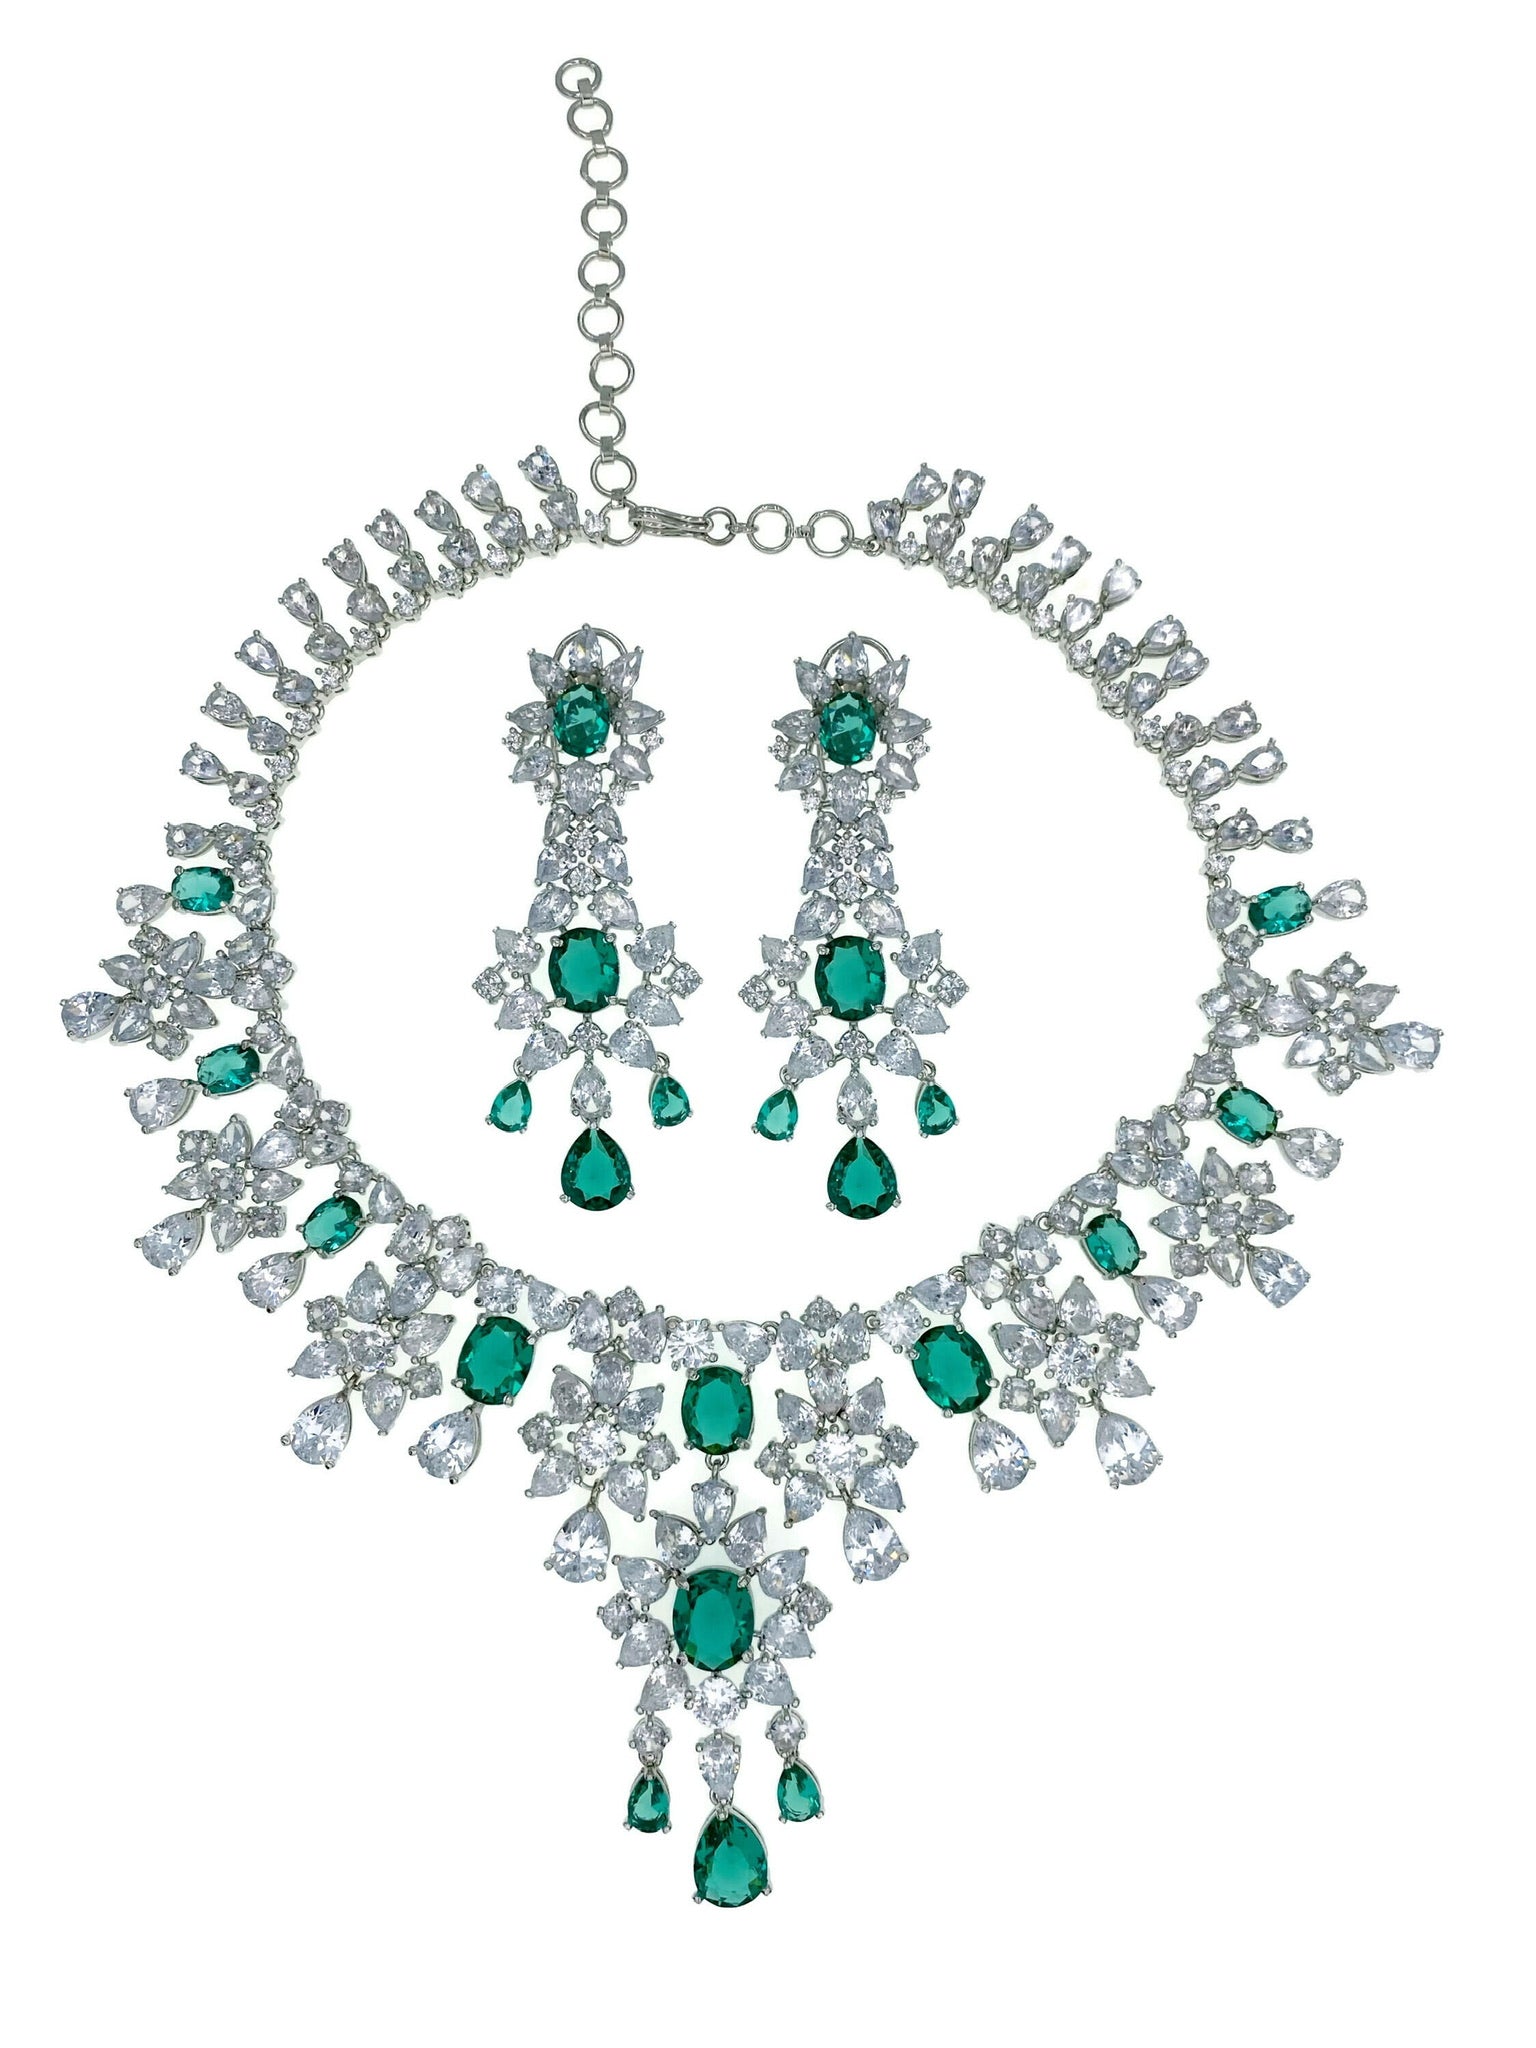 Green Tourmaline Diamondesque Necklace & Earrings full view